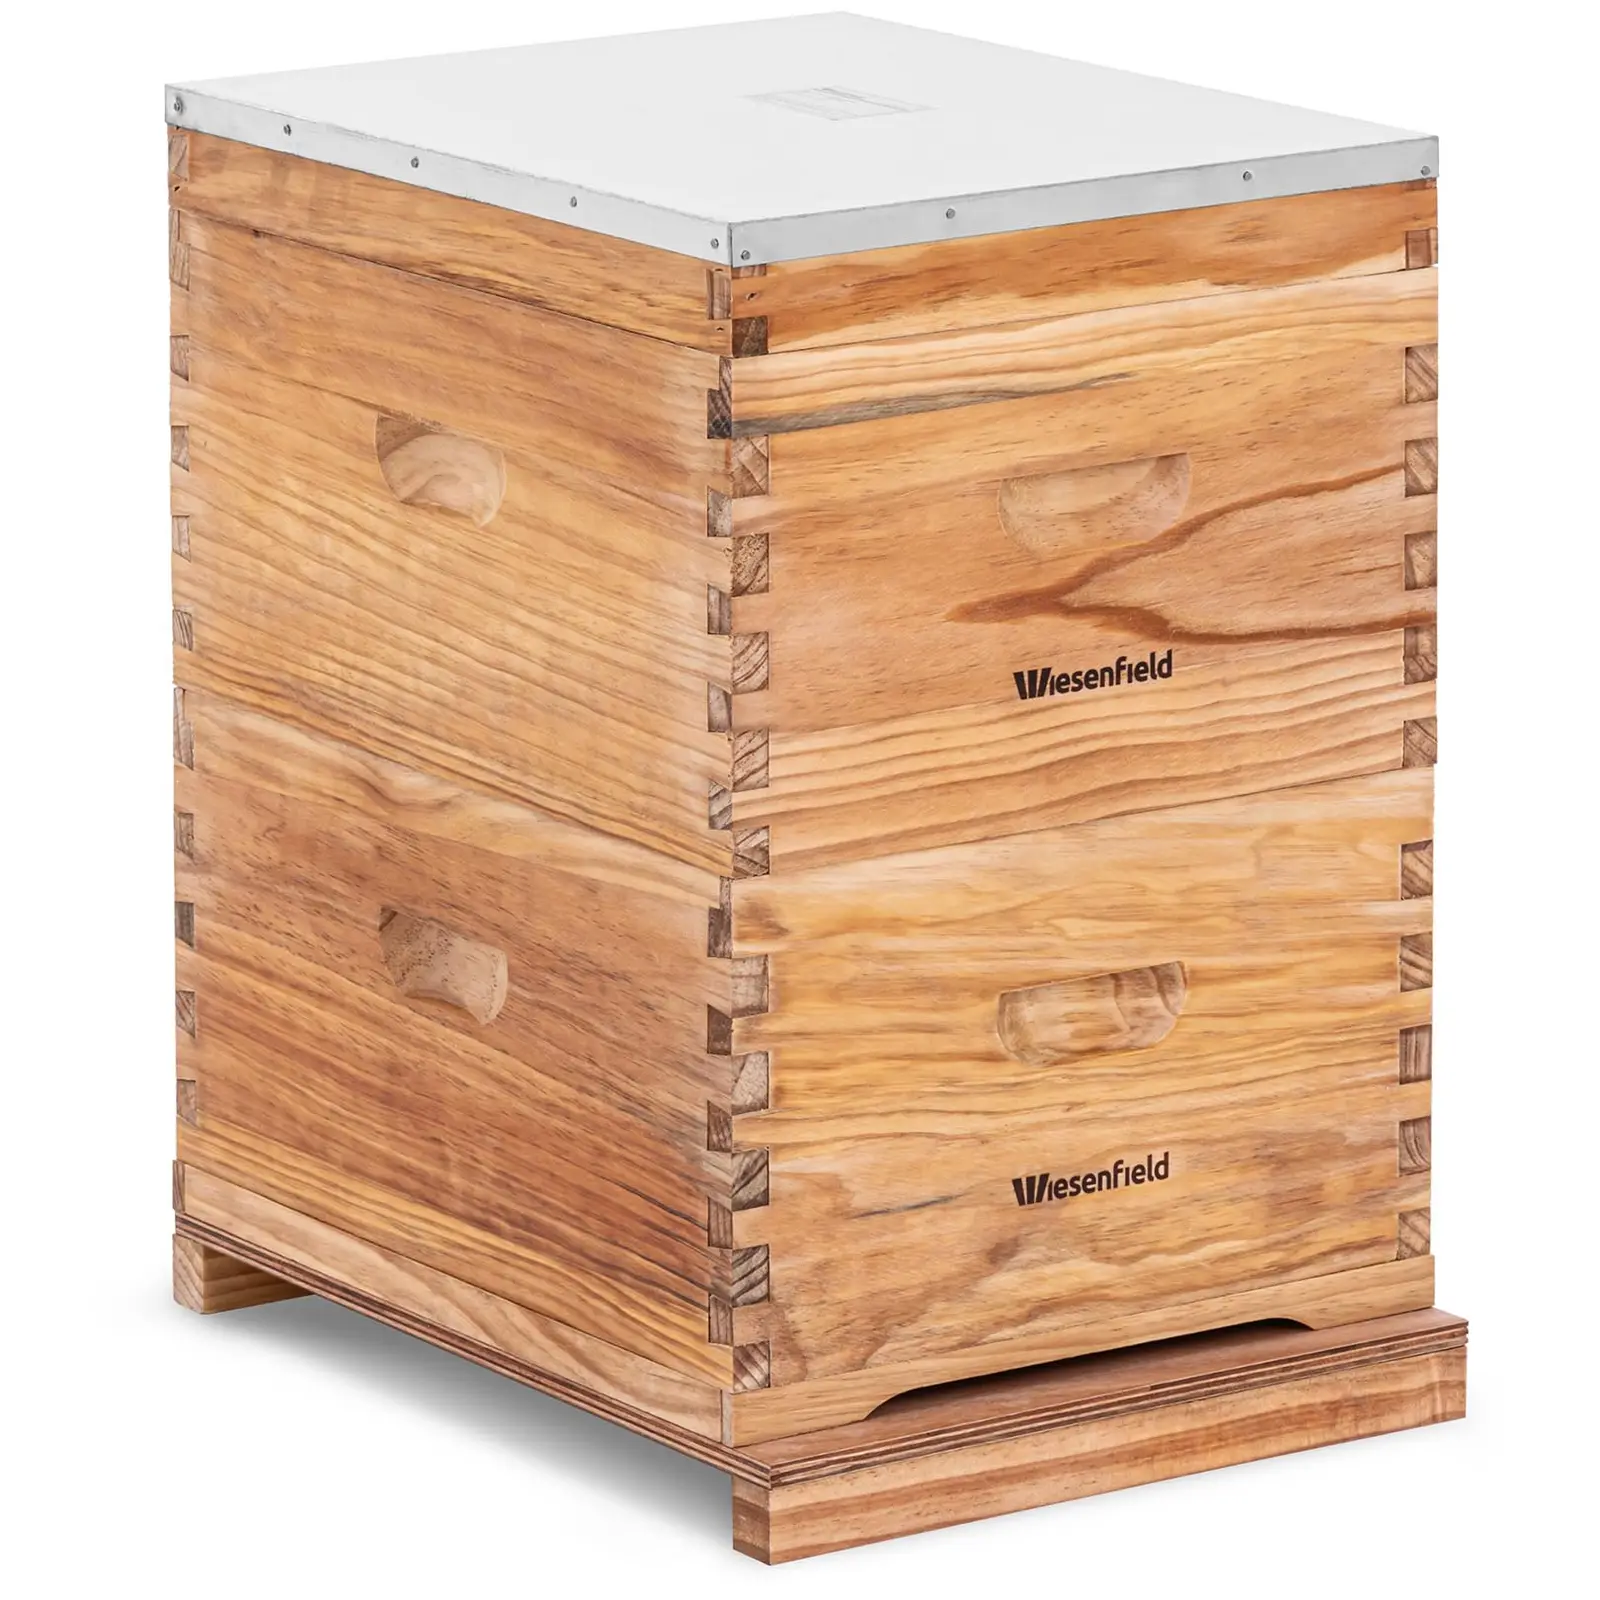 Beehive - 2 frames and floor cassette with entrance hole - ventilation holes with metal cover